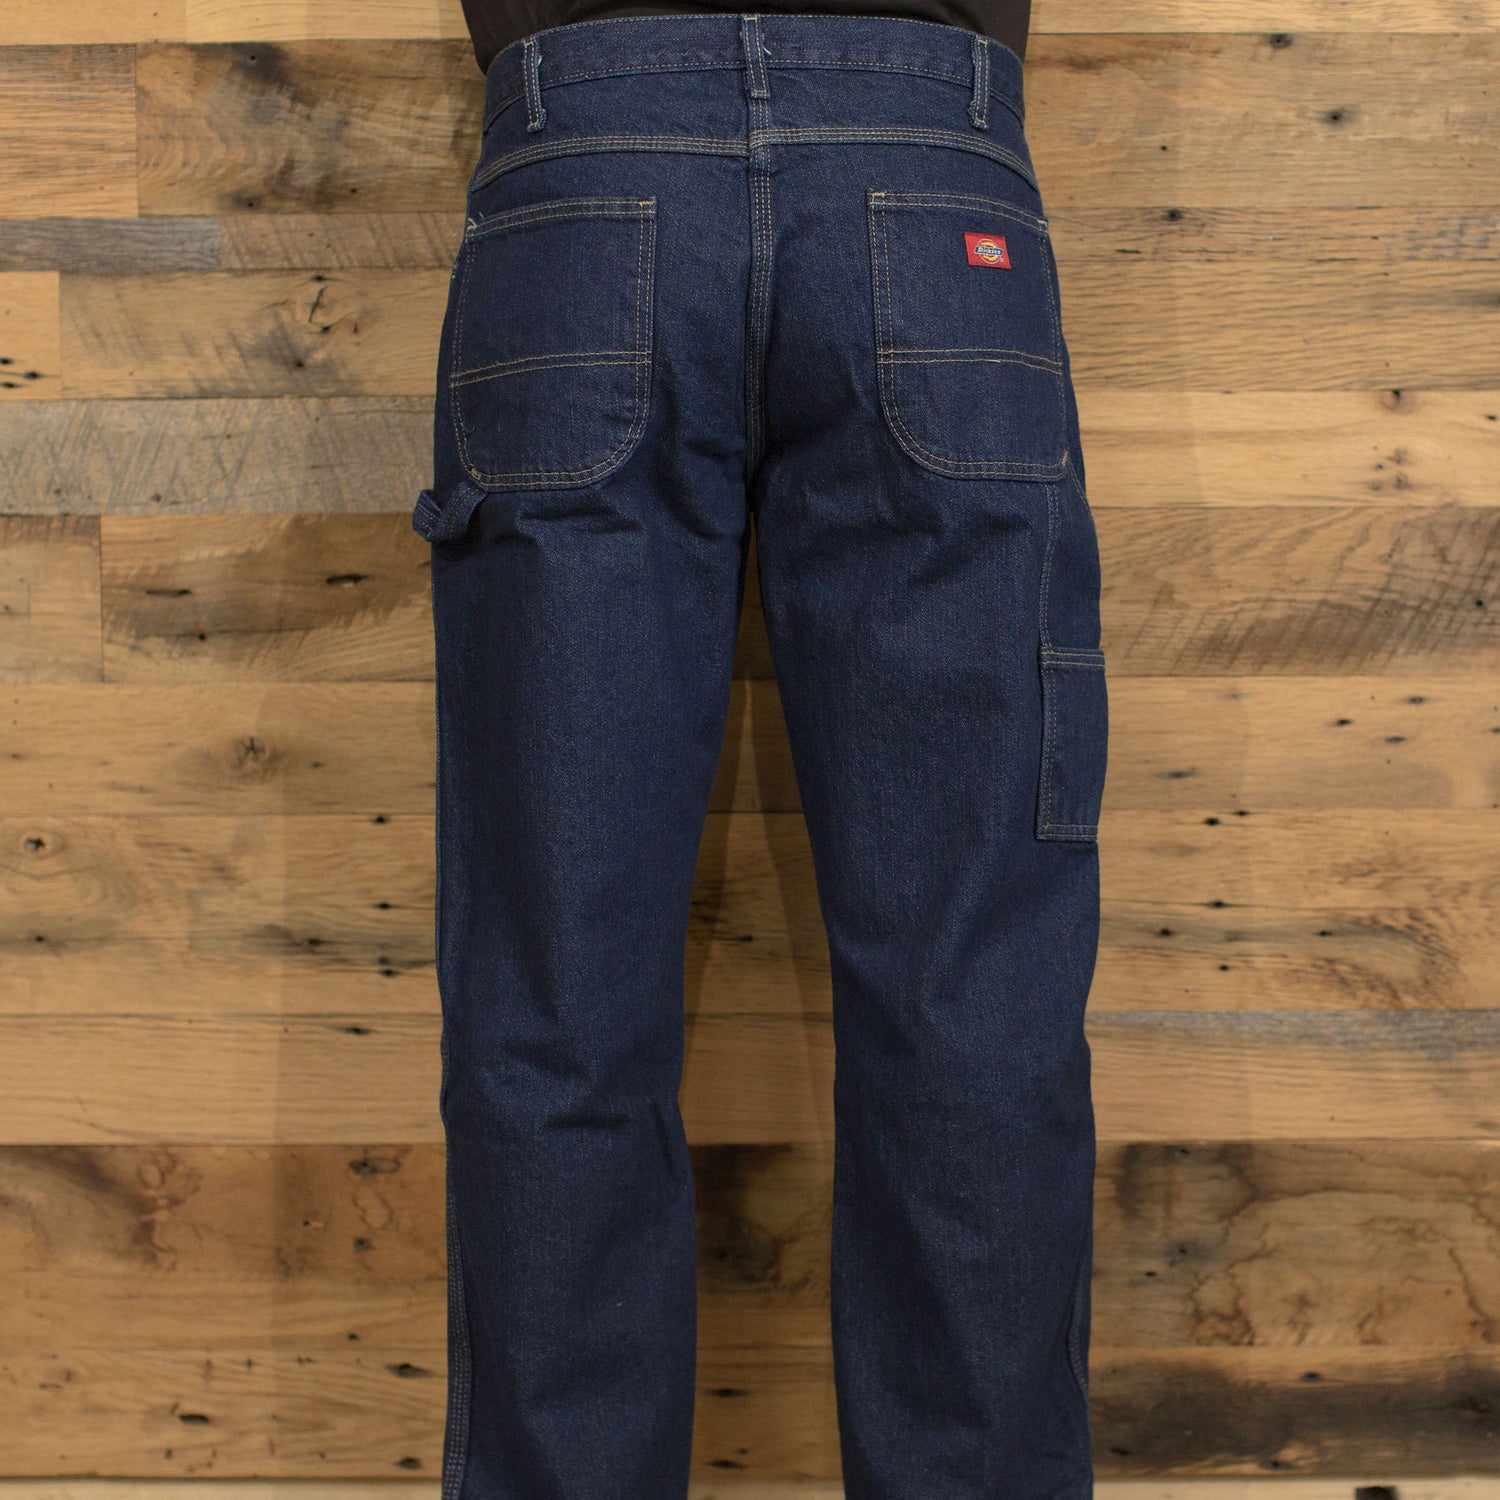 RELAXED FIT CARPENTER DENIM JEANS